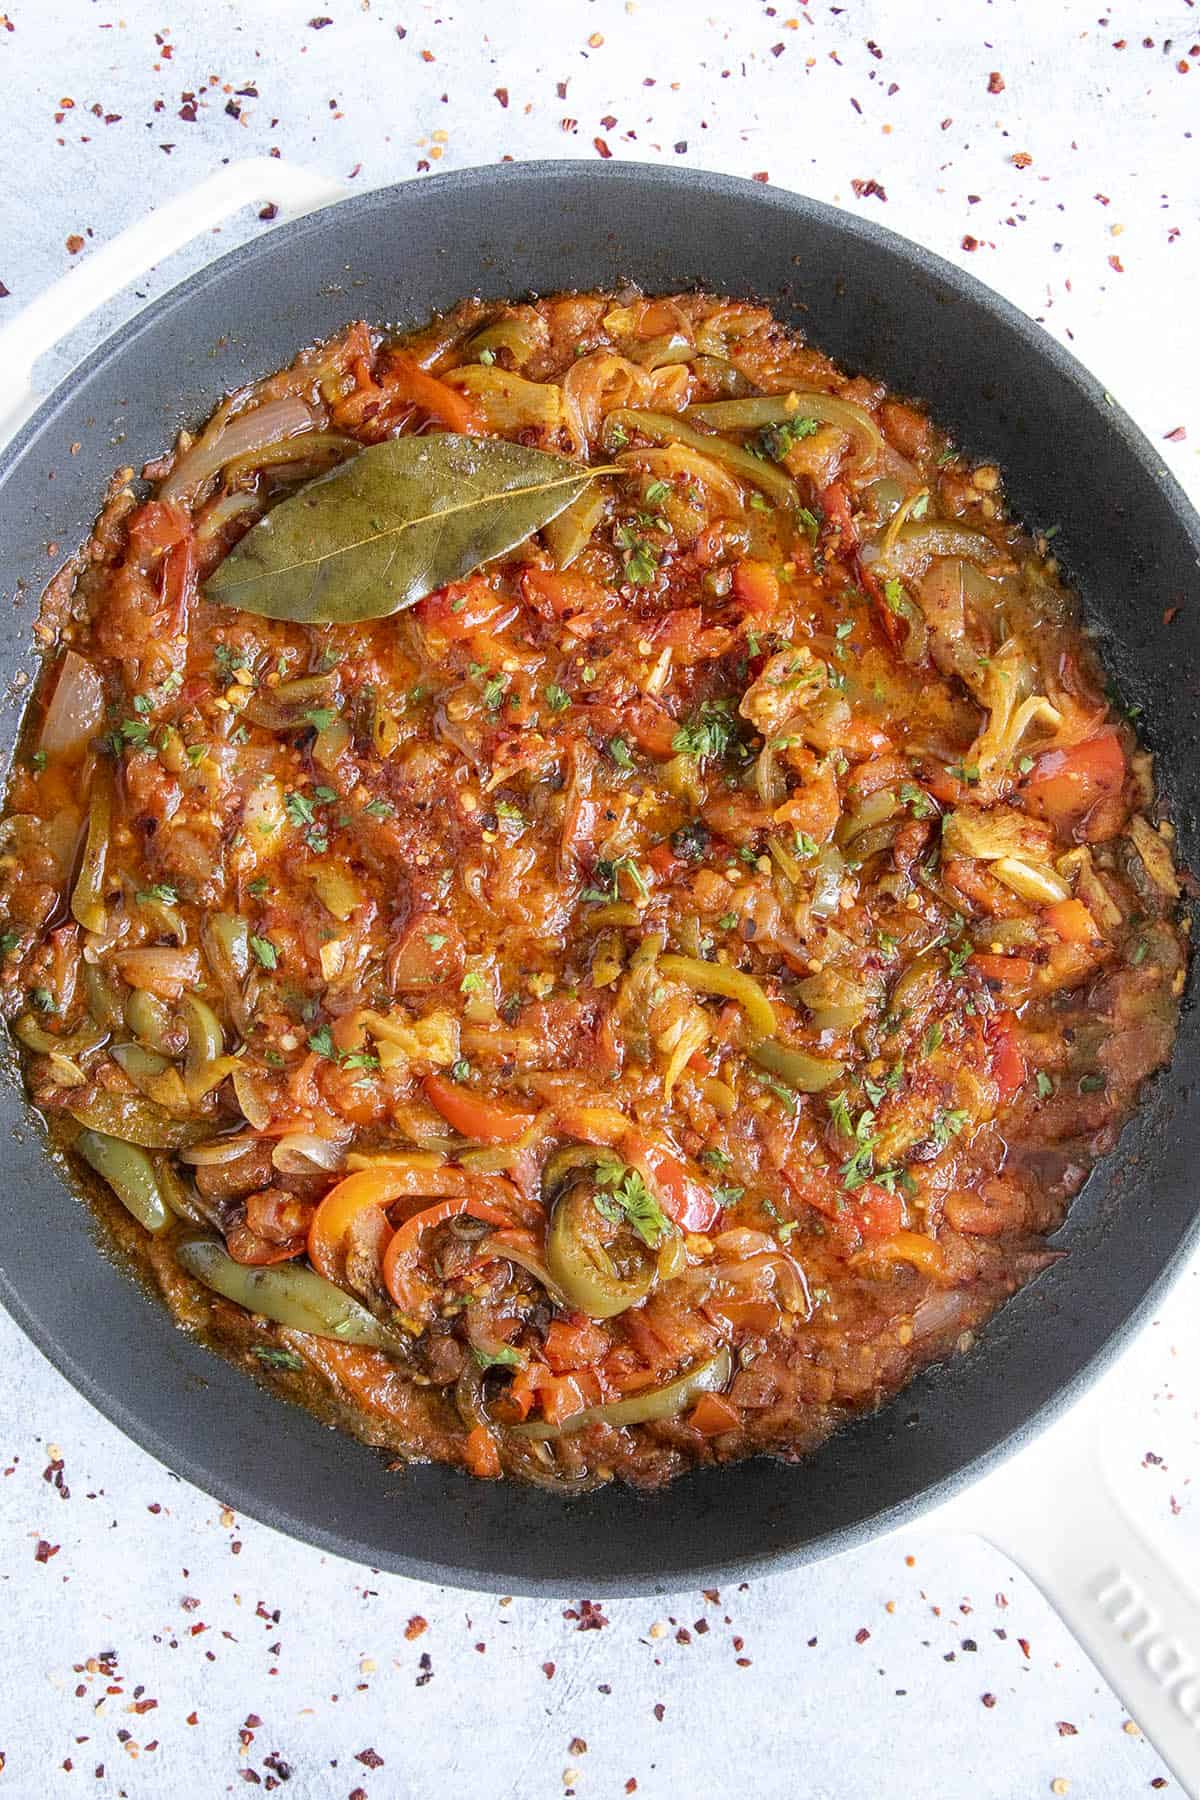 Piperade (Basque Tomato-Pepper Sauce) stewing in a pan